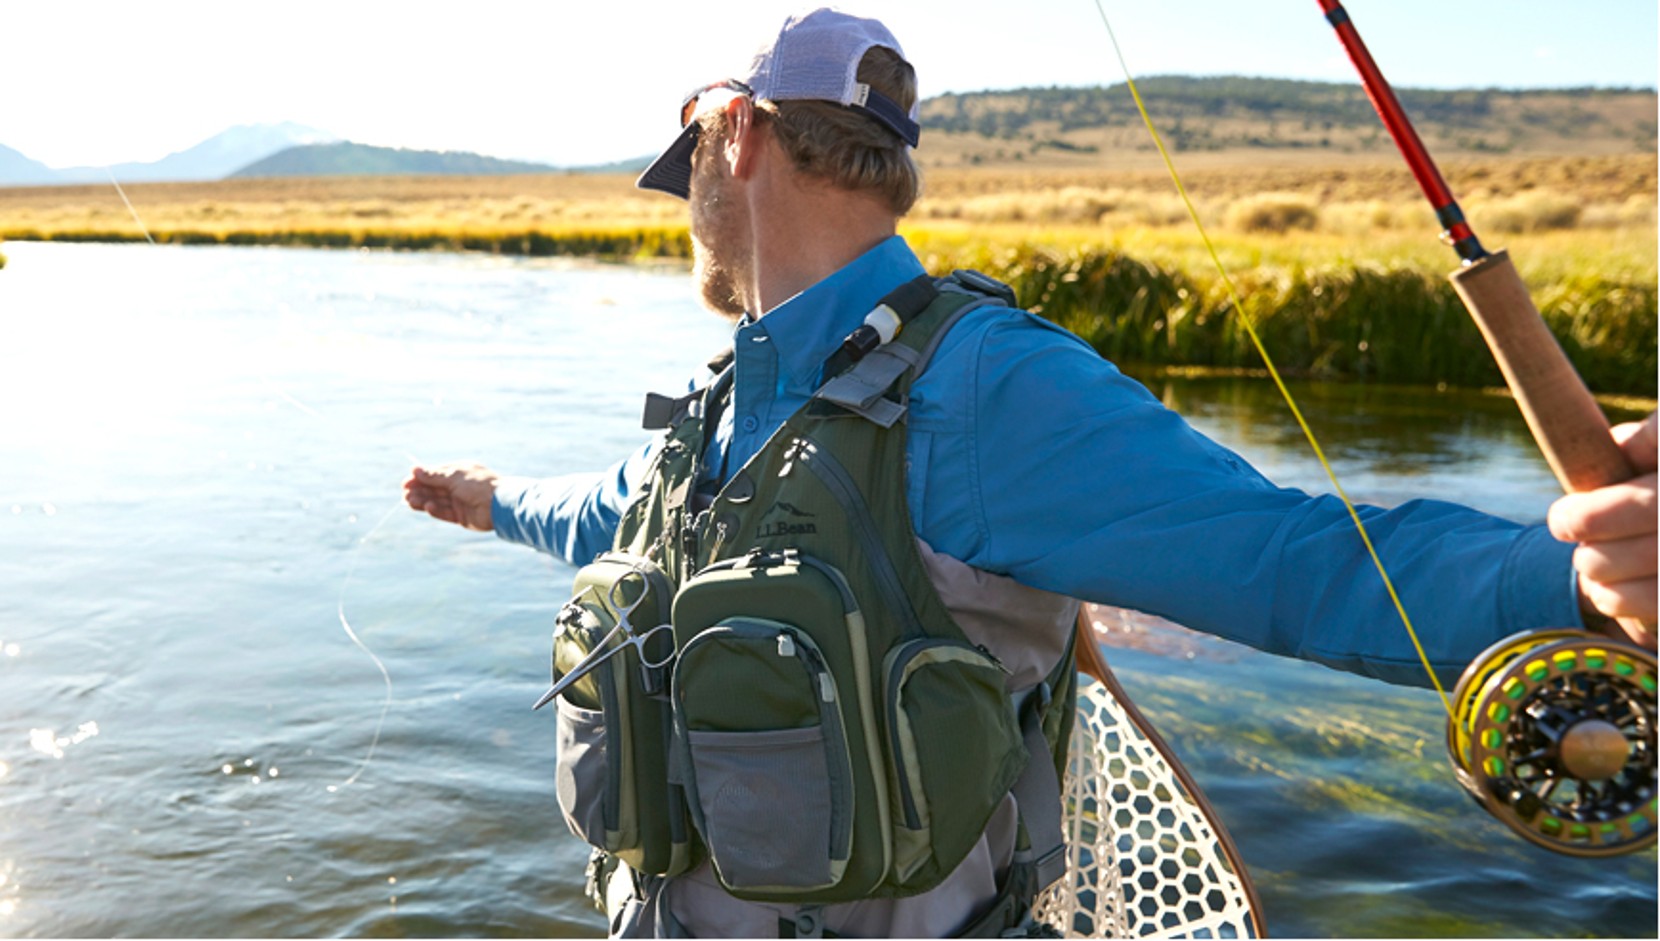 Rapid River Vest Pack. We've packed 23 new features into our best selling fly-fishing vest. 